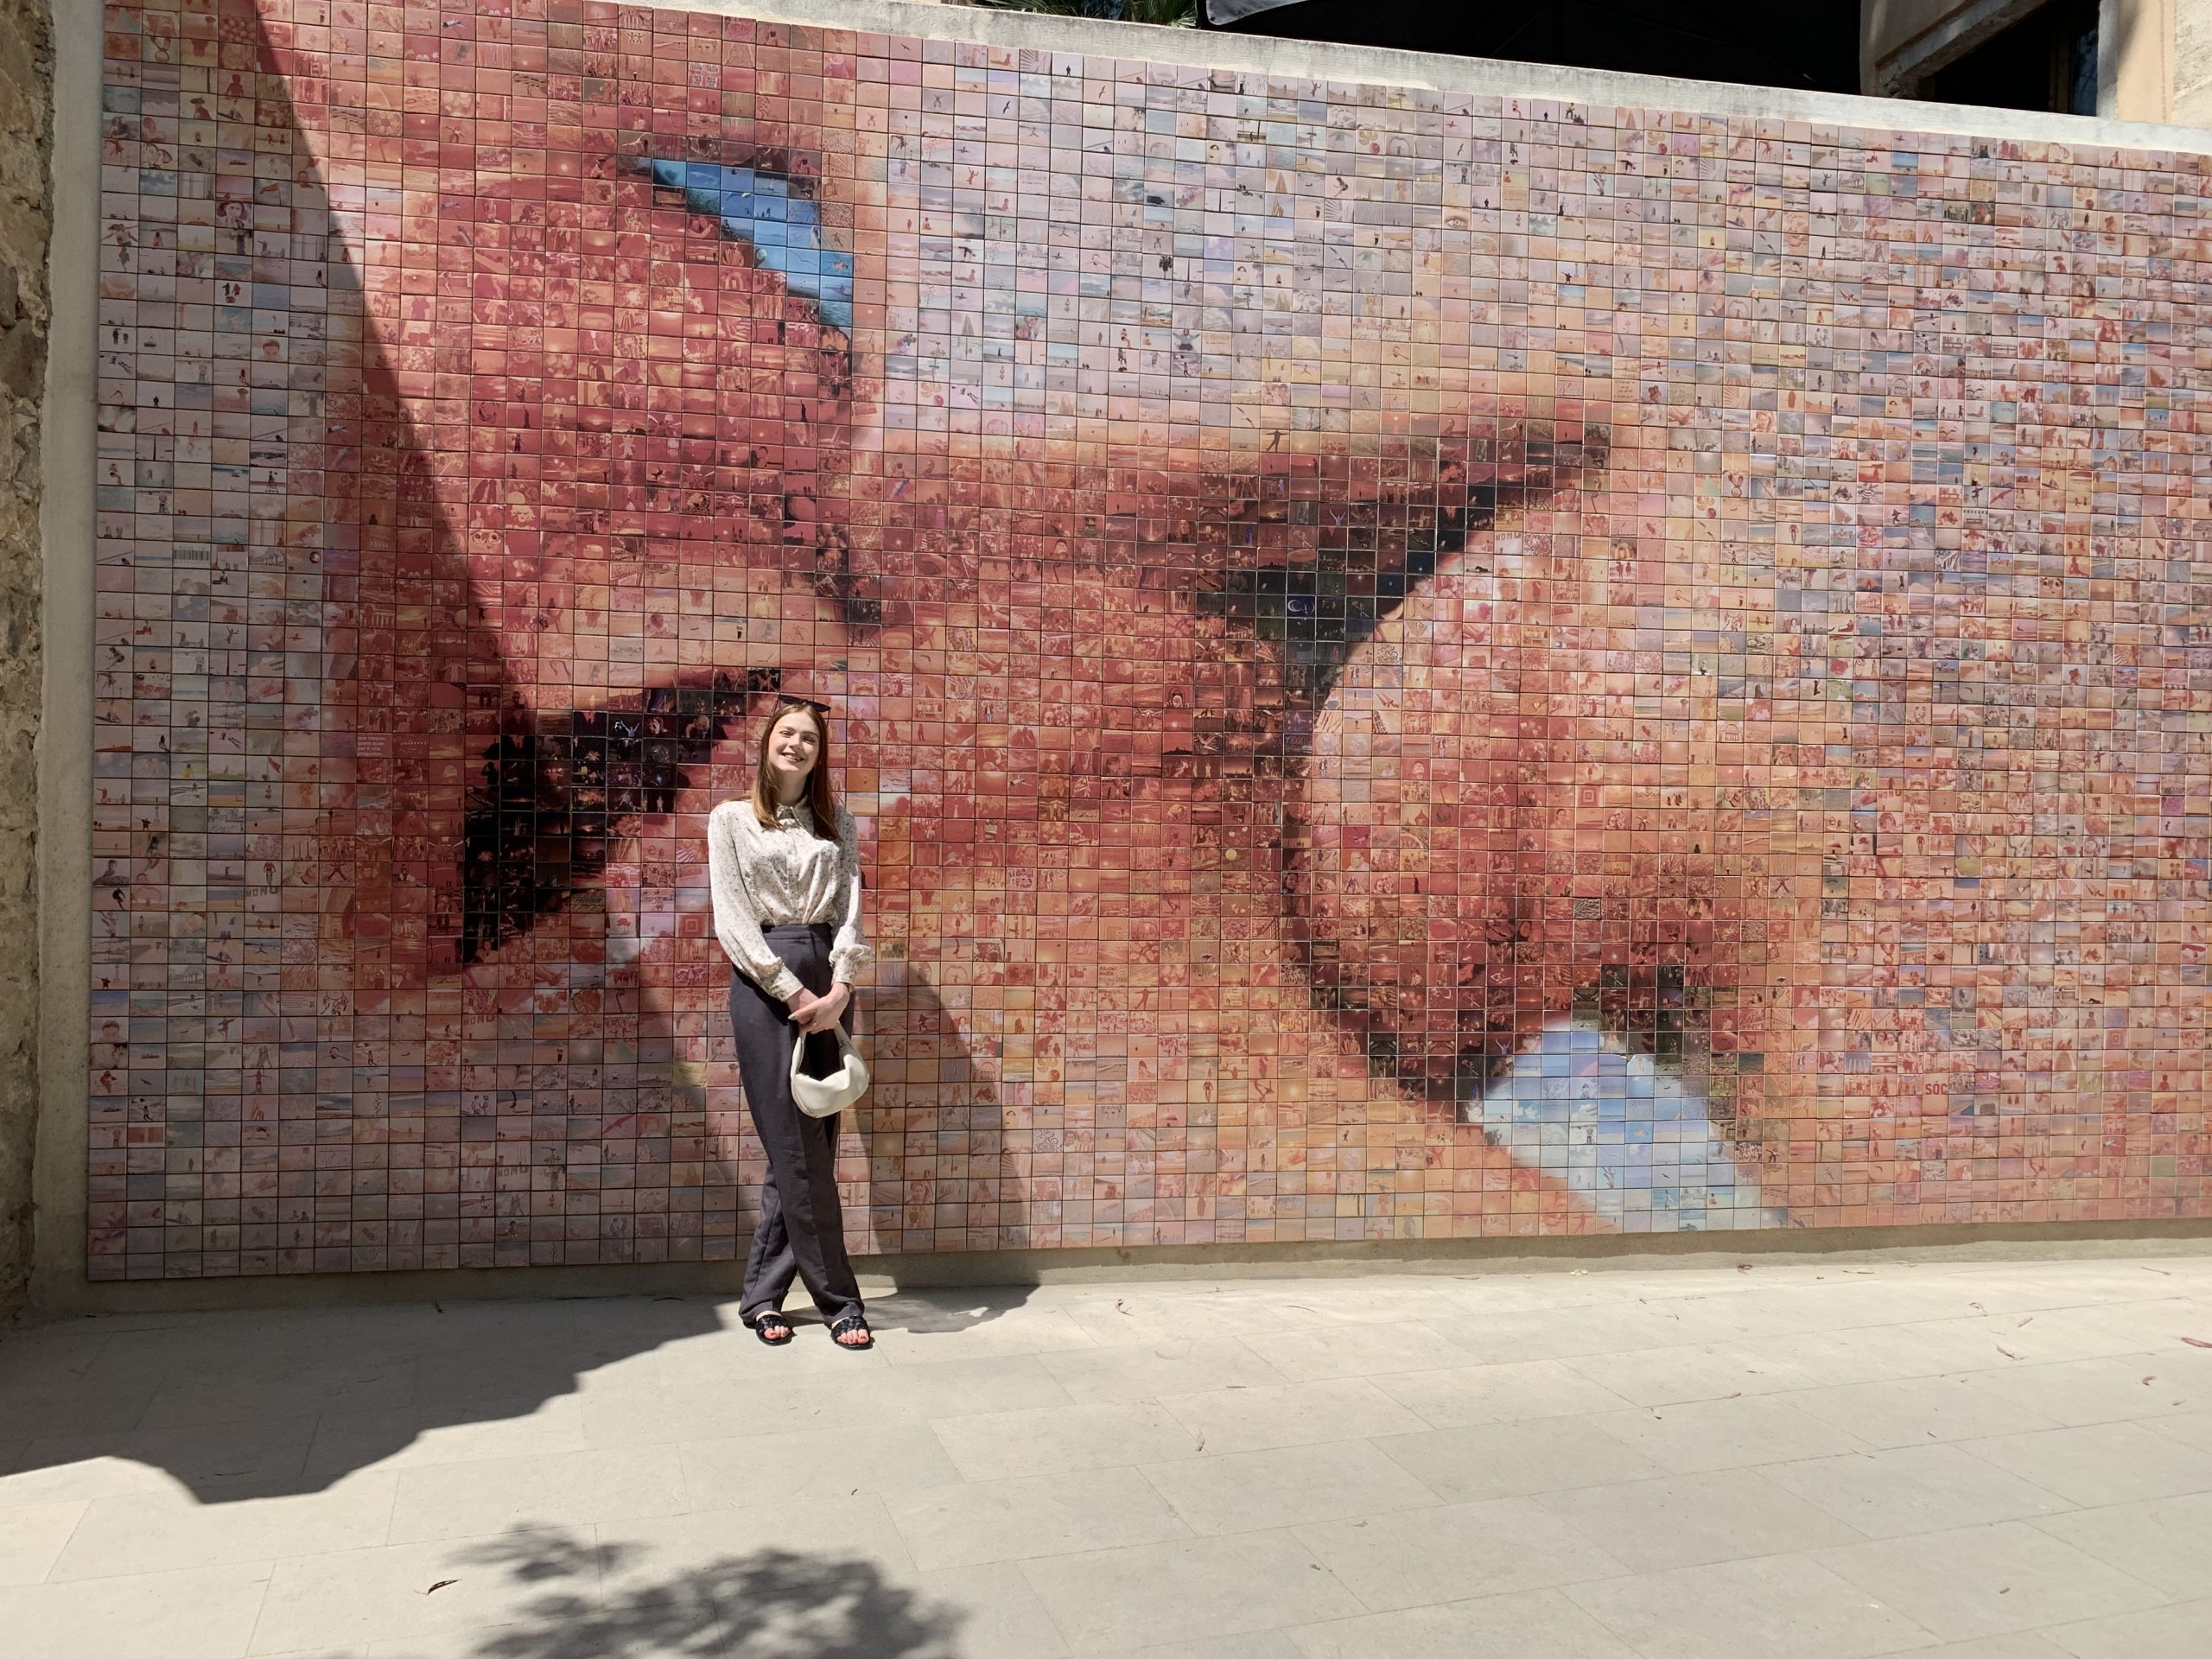 romantic things to do in Barcelona instagram spots the kiss mural